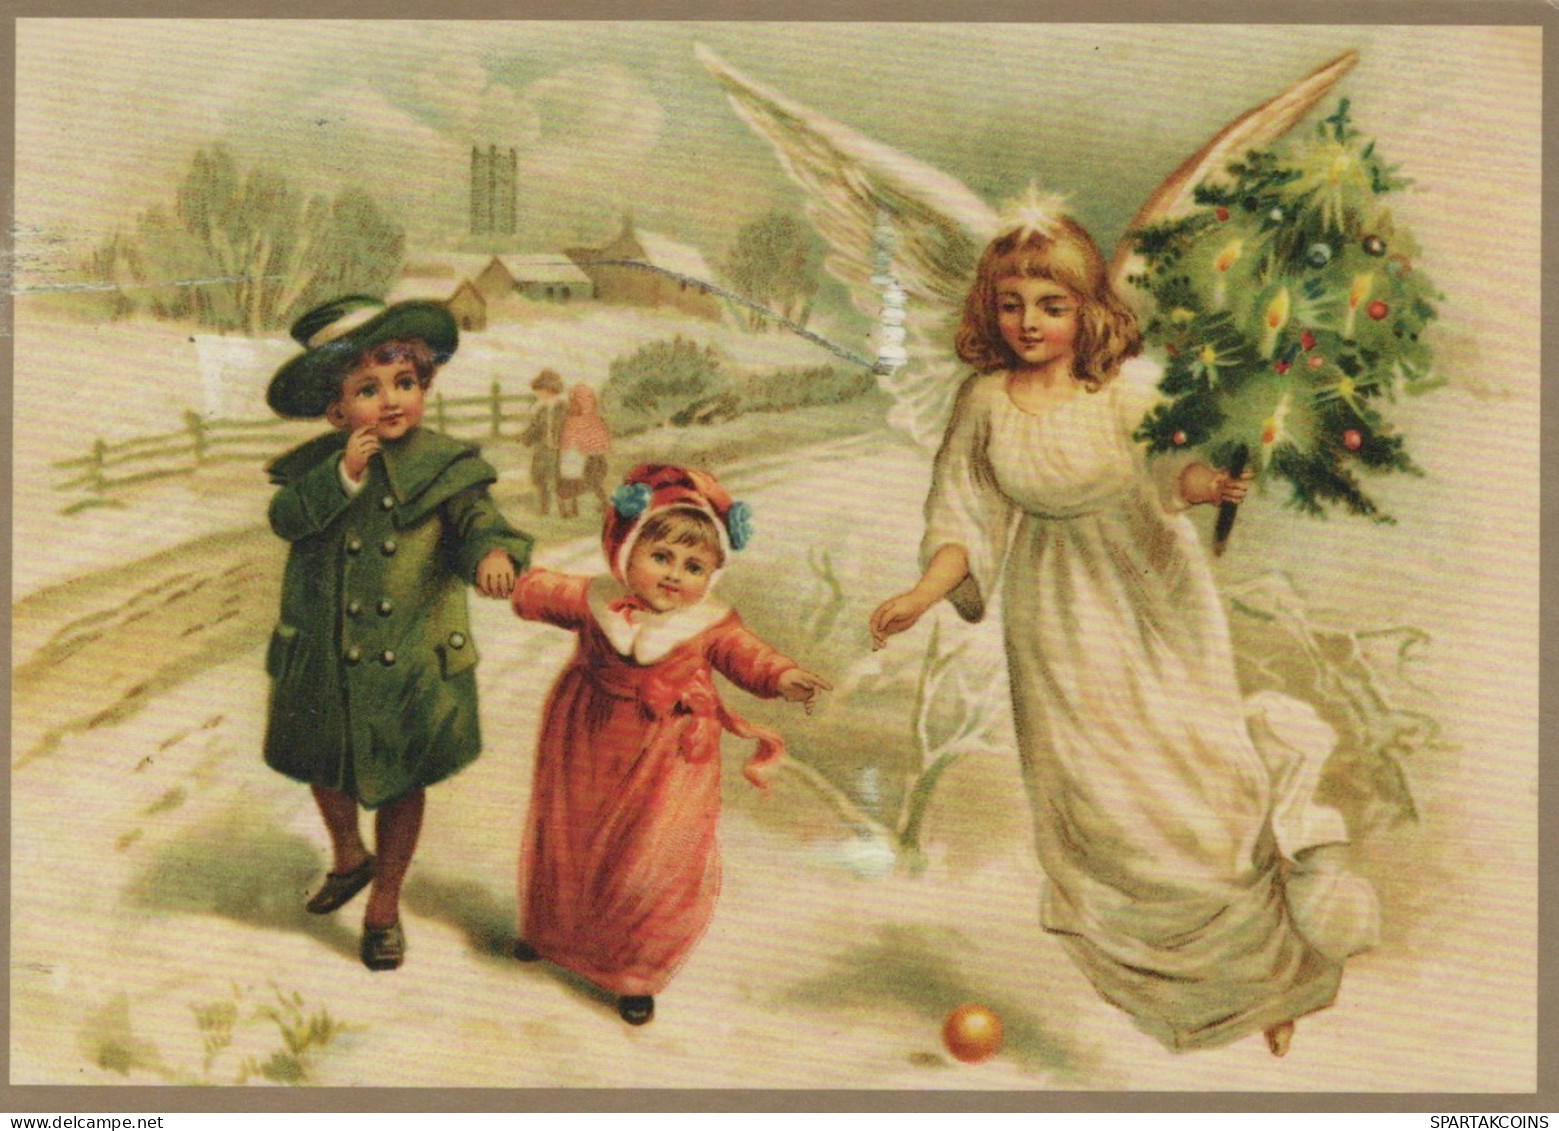 ANGELO Buon Anno Natale Vintage Cartolina CPSM #PAH494.IT - Angeles